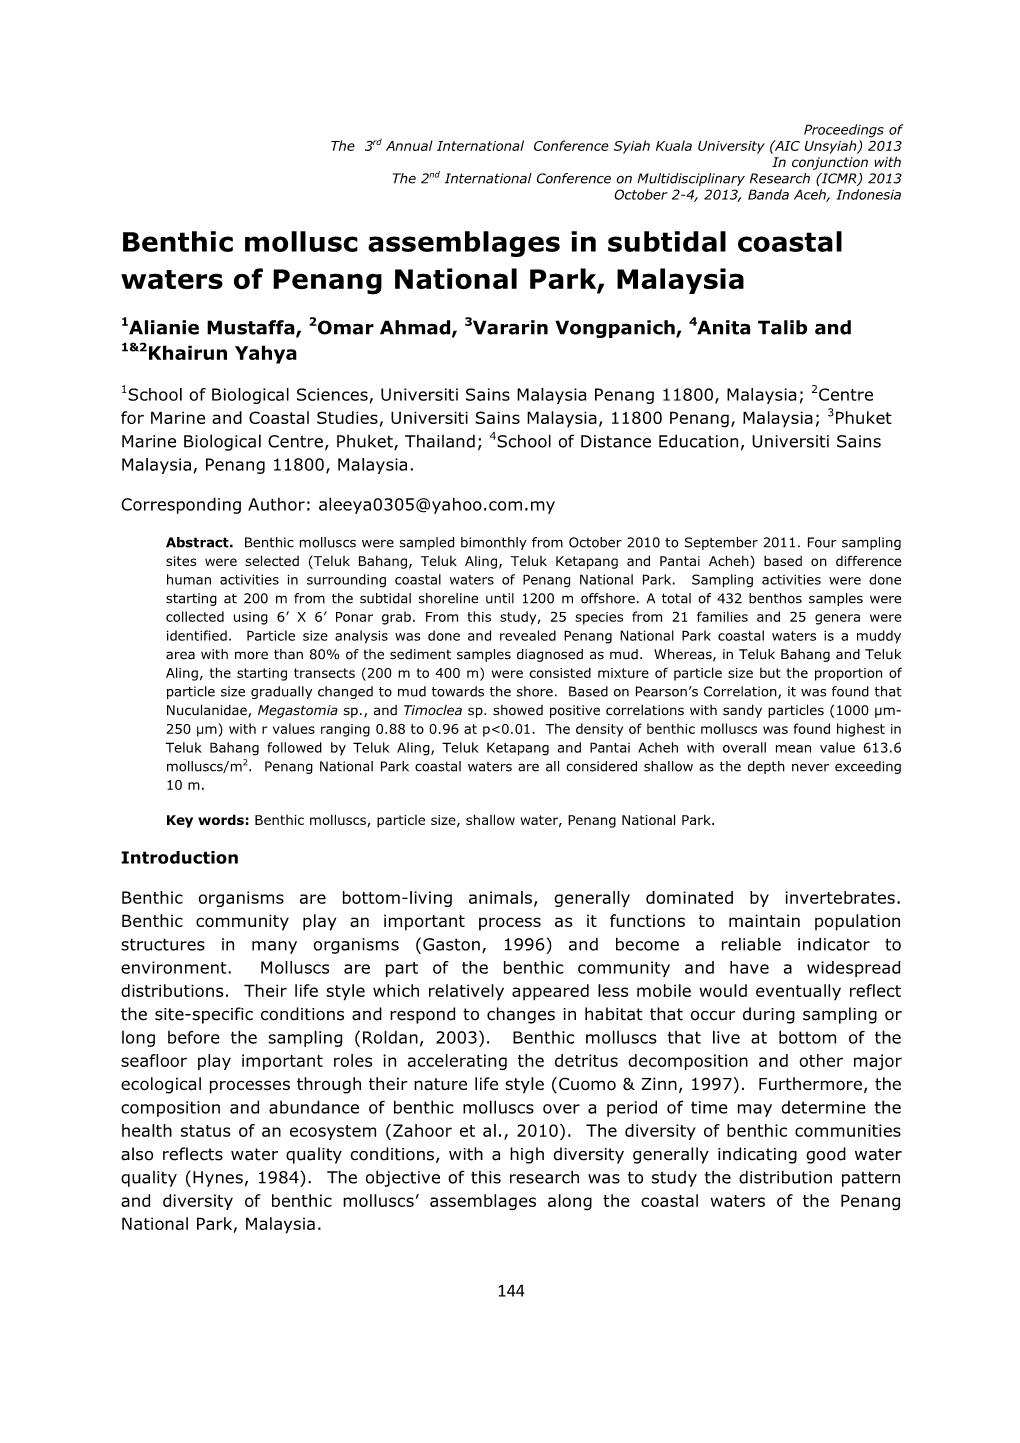 Benthic Mollusc Assemblages in Subtidal Coastal Waters of Penang National Park, Malaysia